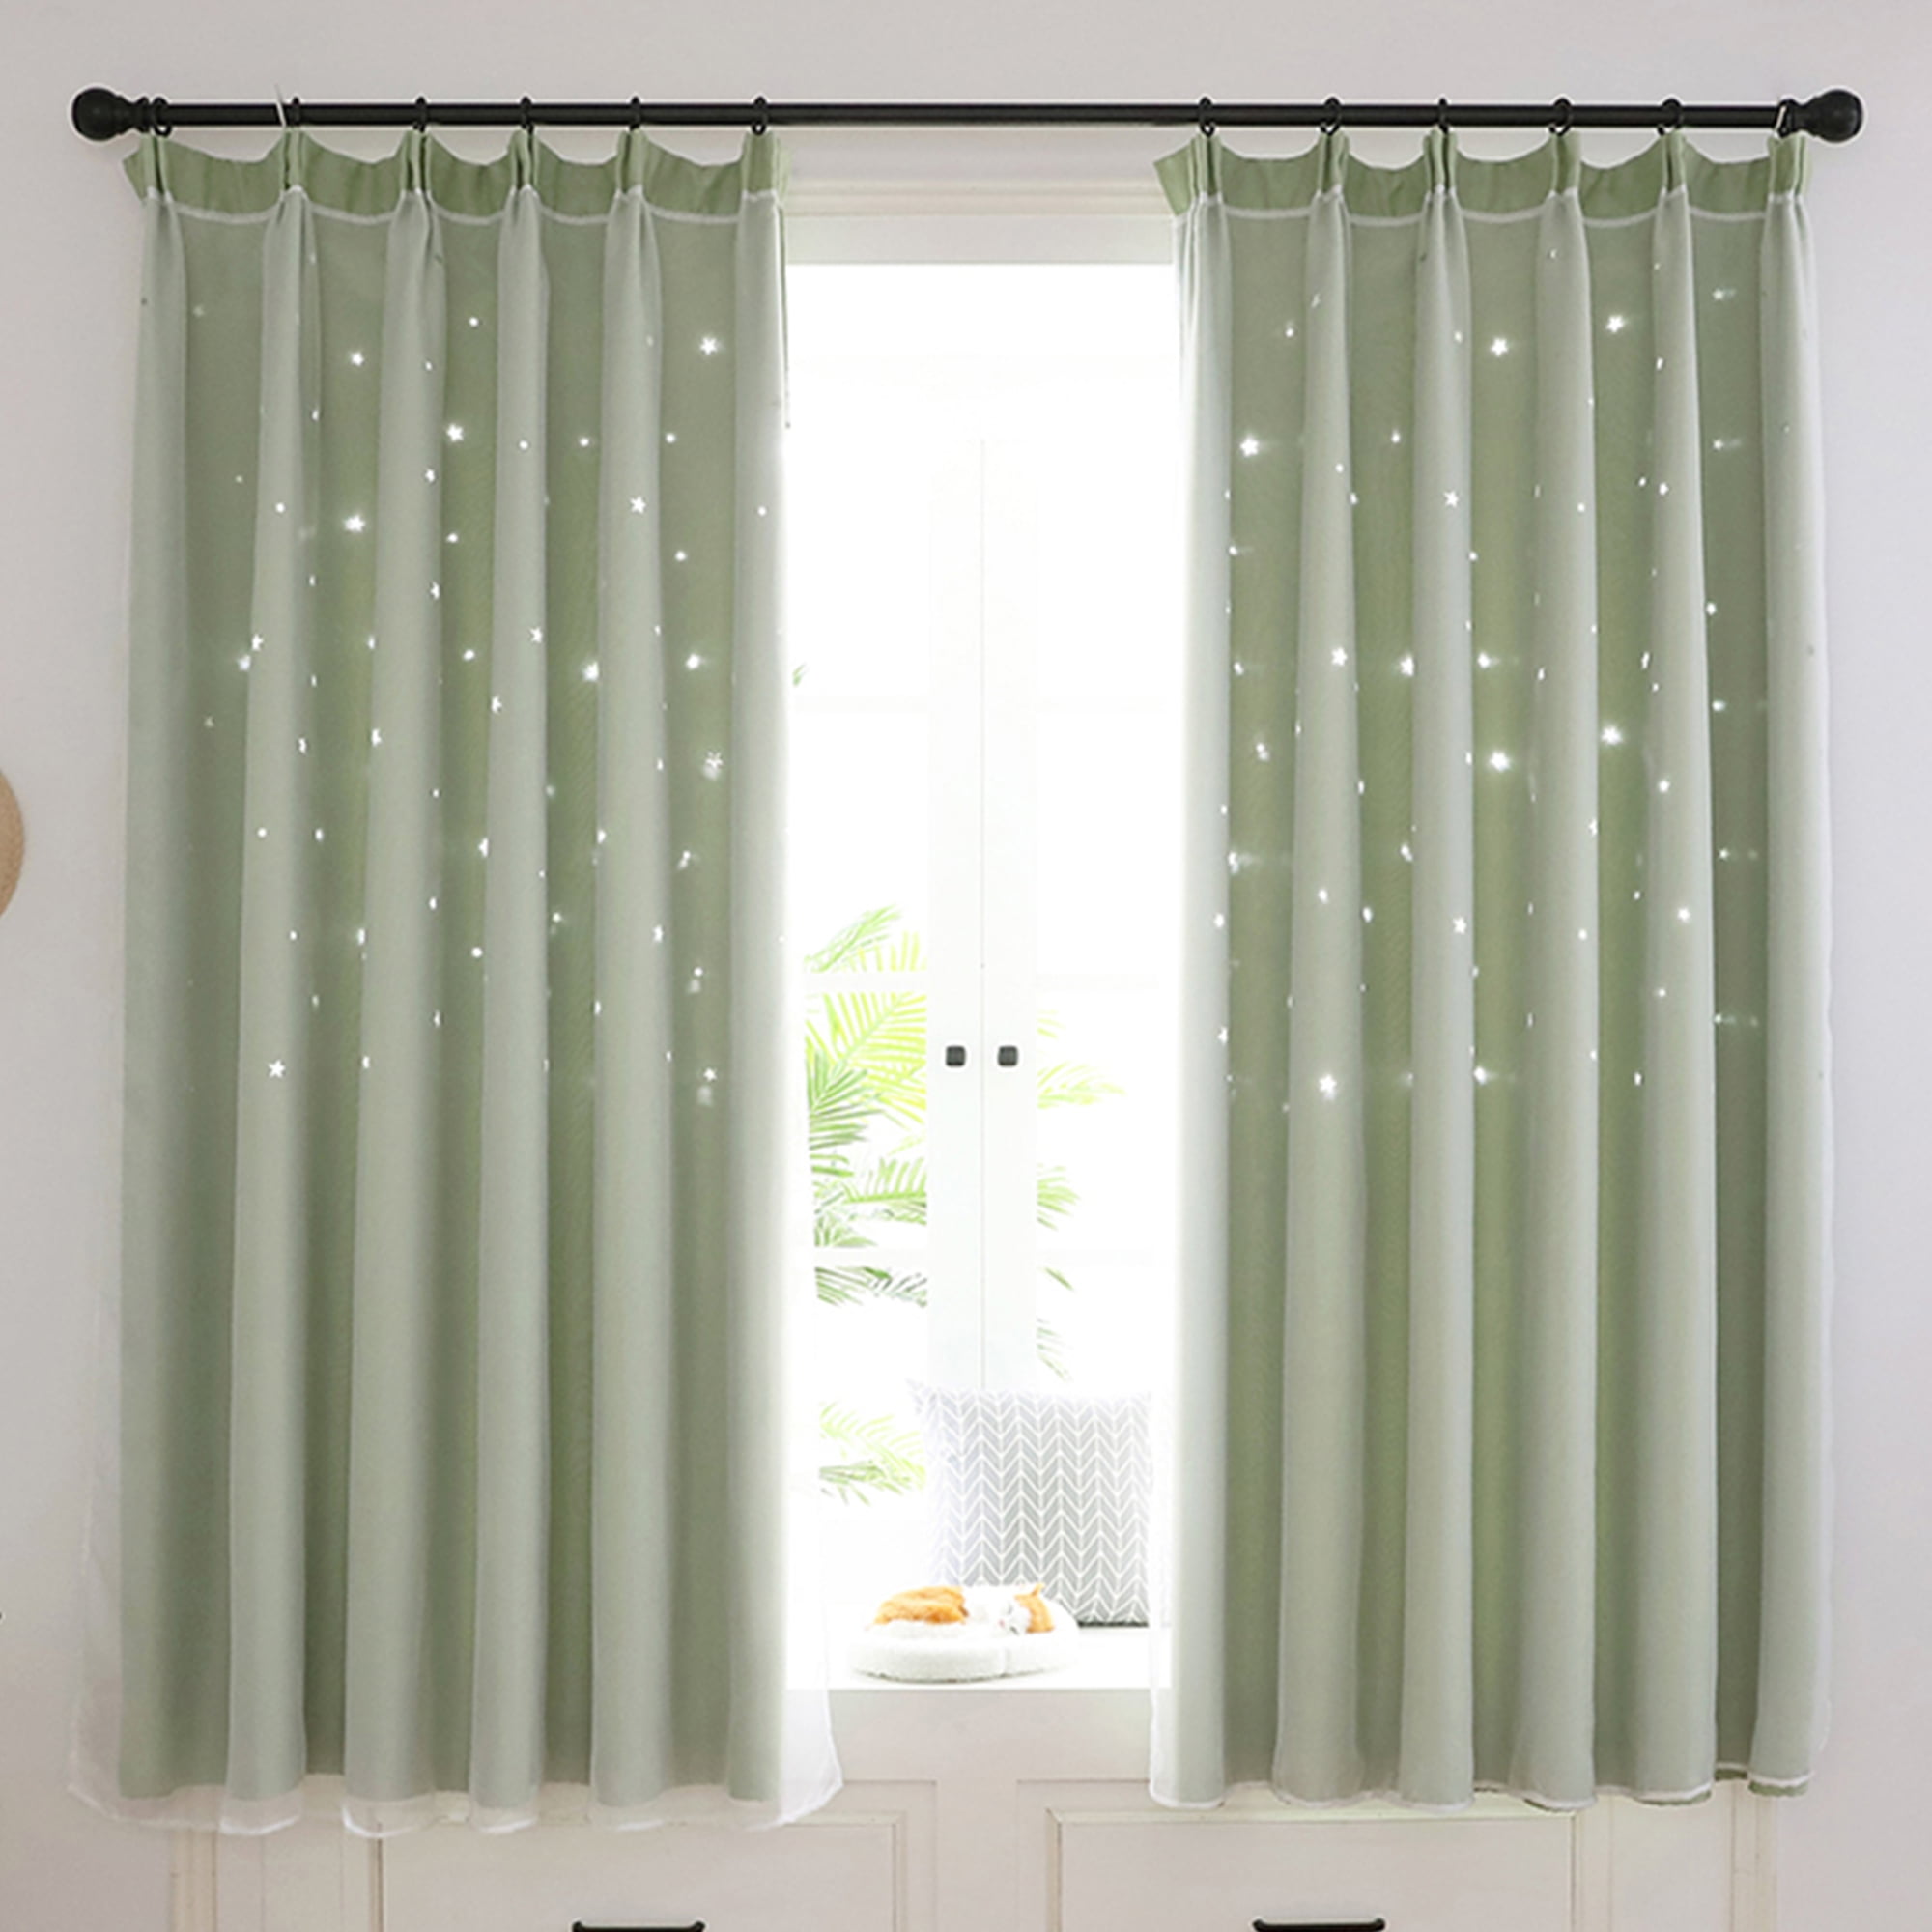 Cartoon Blackout Curtain for Boys Girls Bedroom Thermal Eyelet Ring Curtains DP 